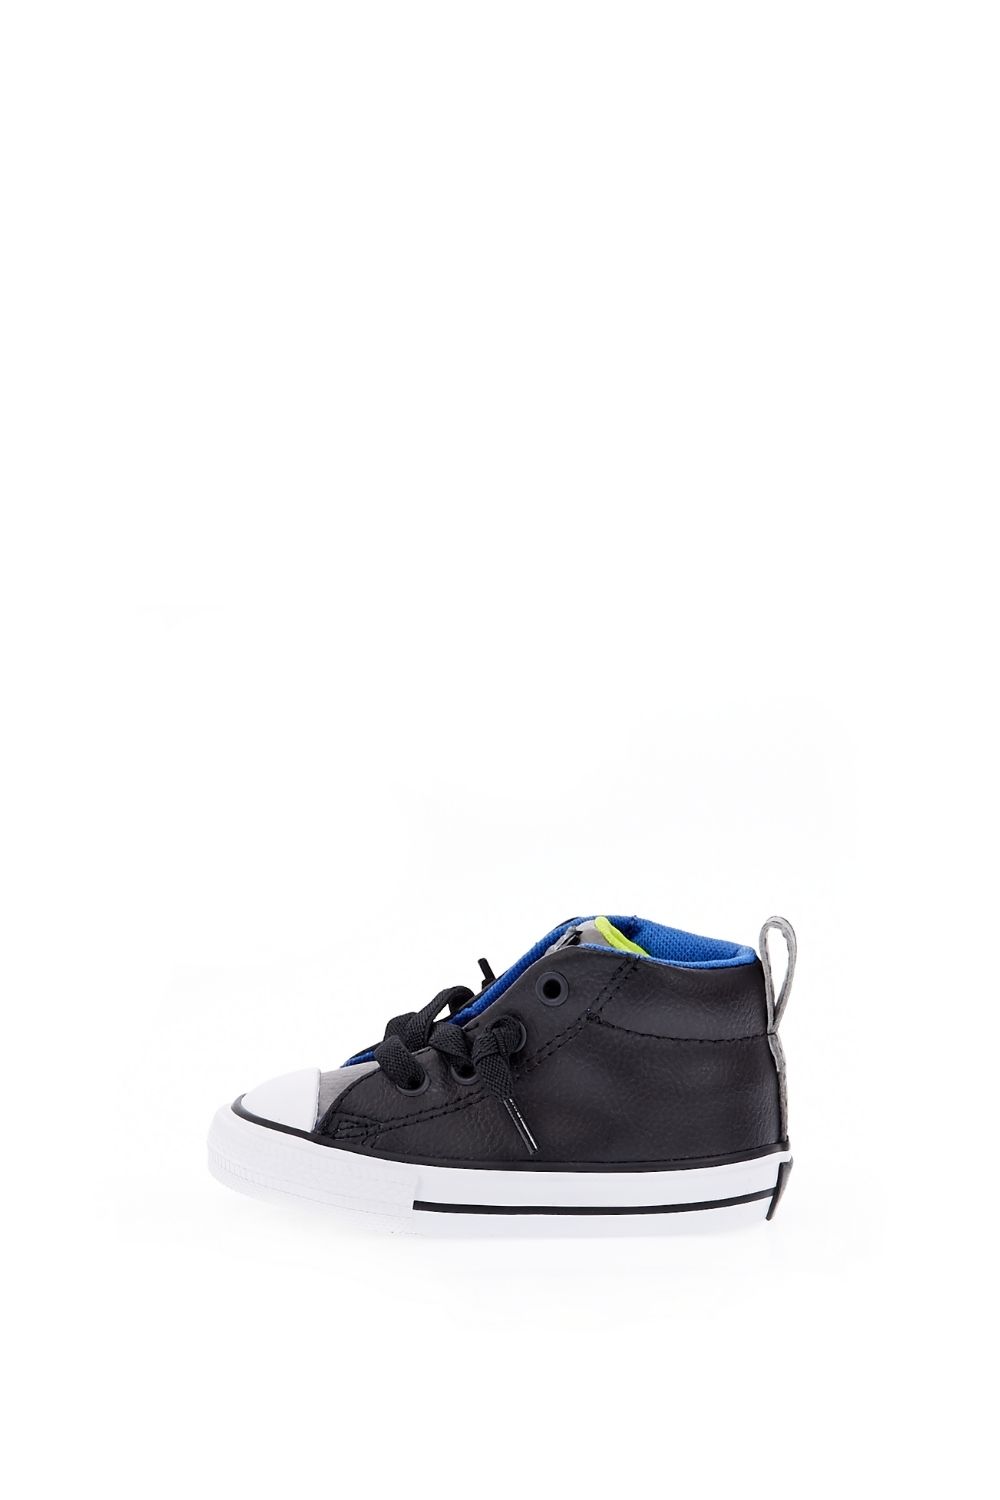 CONVERSE - Βρεφικά παπούτσια Chuck Taylor All Star Street M μαύρα Παιδικά/Baby/Παπούτσια/Sneakers